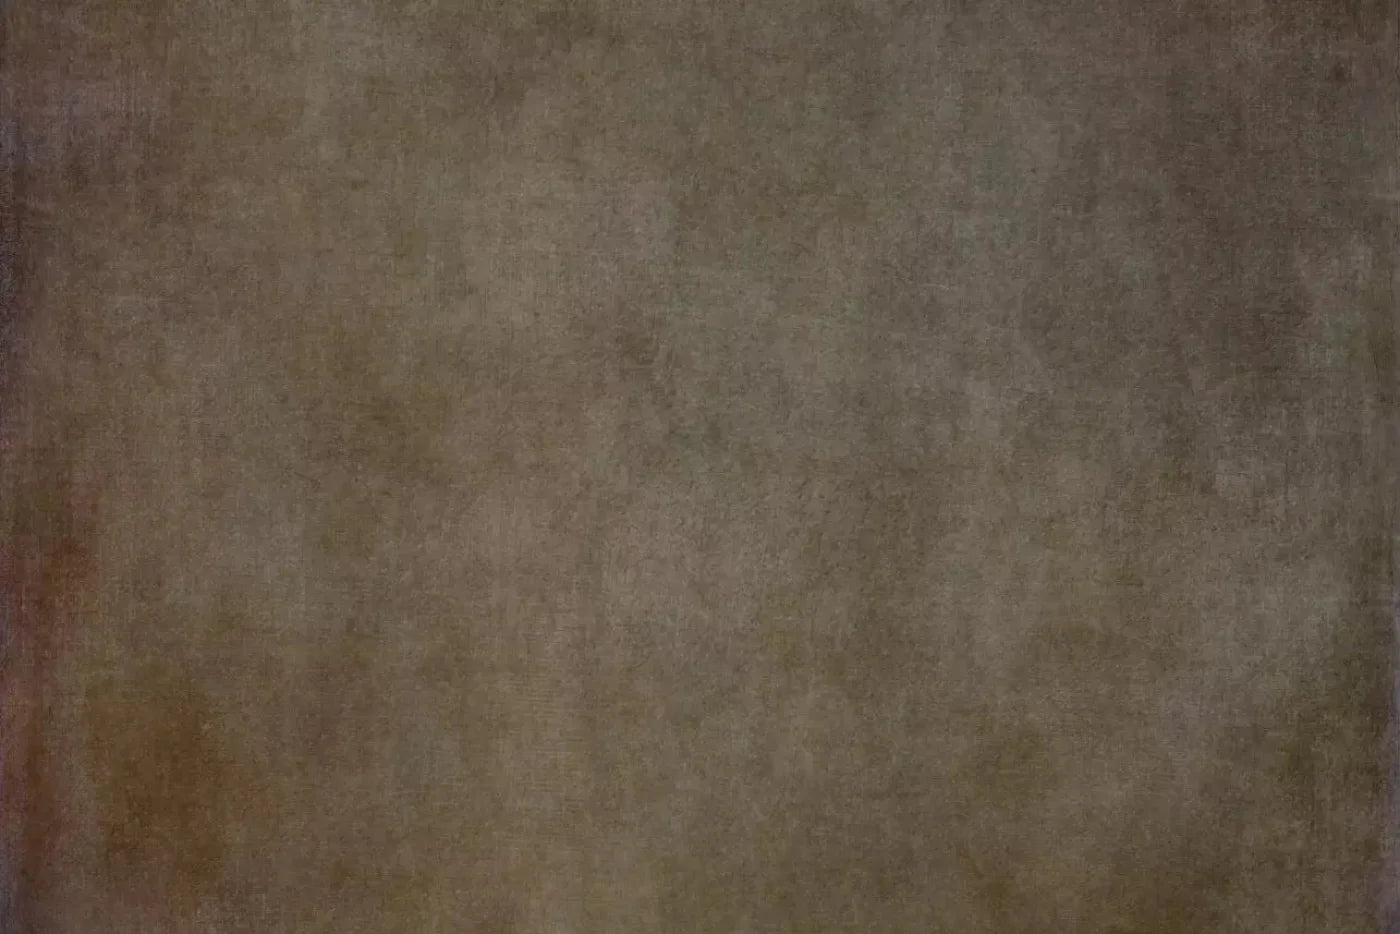 Classic Texture Earth Brown Backdrop